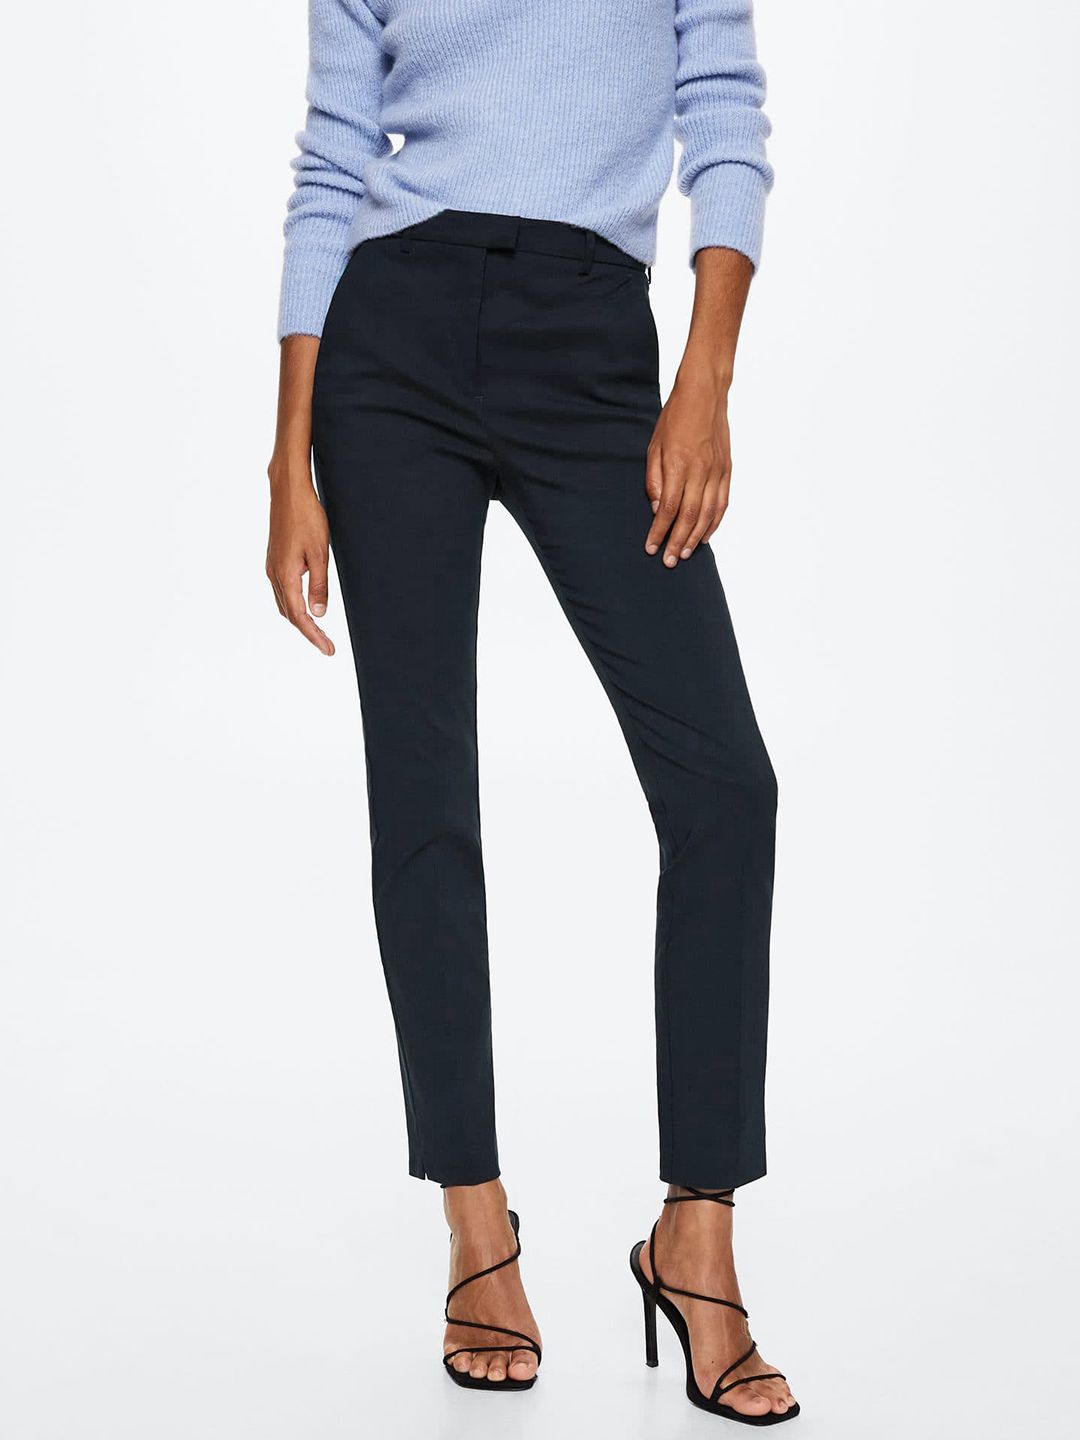 MANGO Women Navy Blue Skinny Fit Sustainable Trousers Price in India